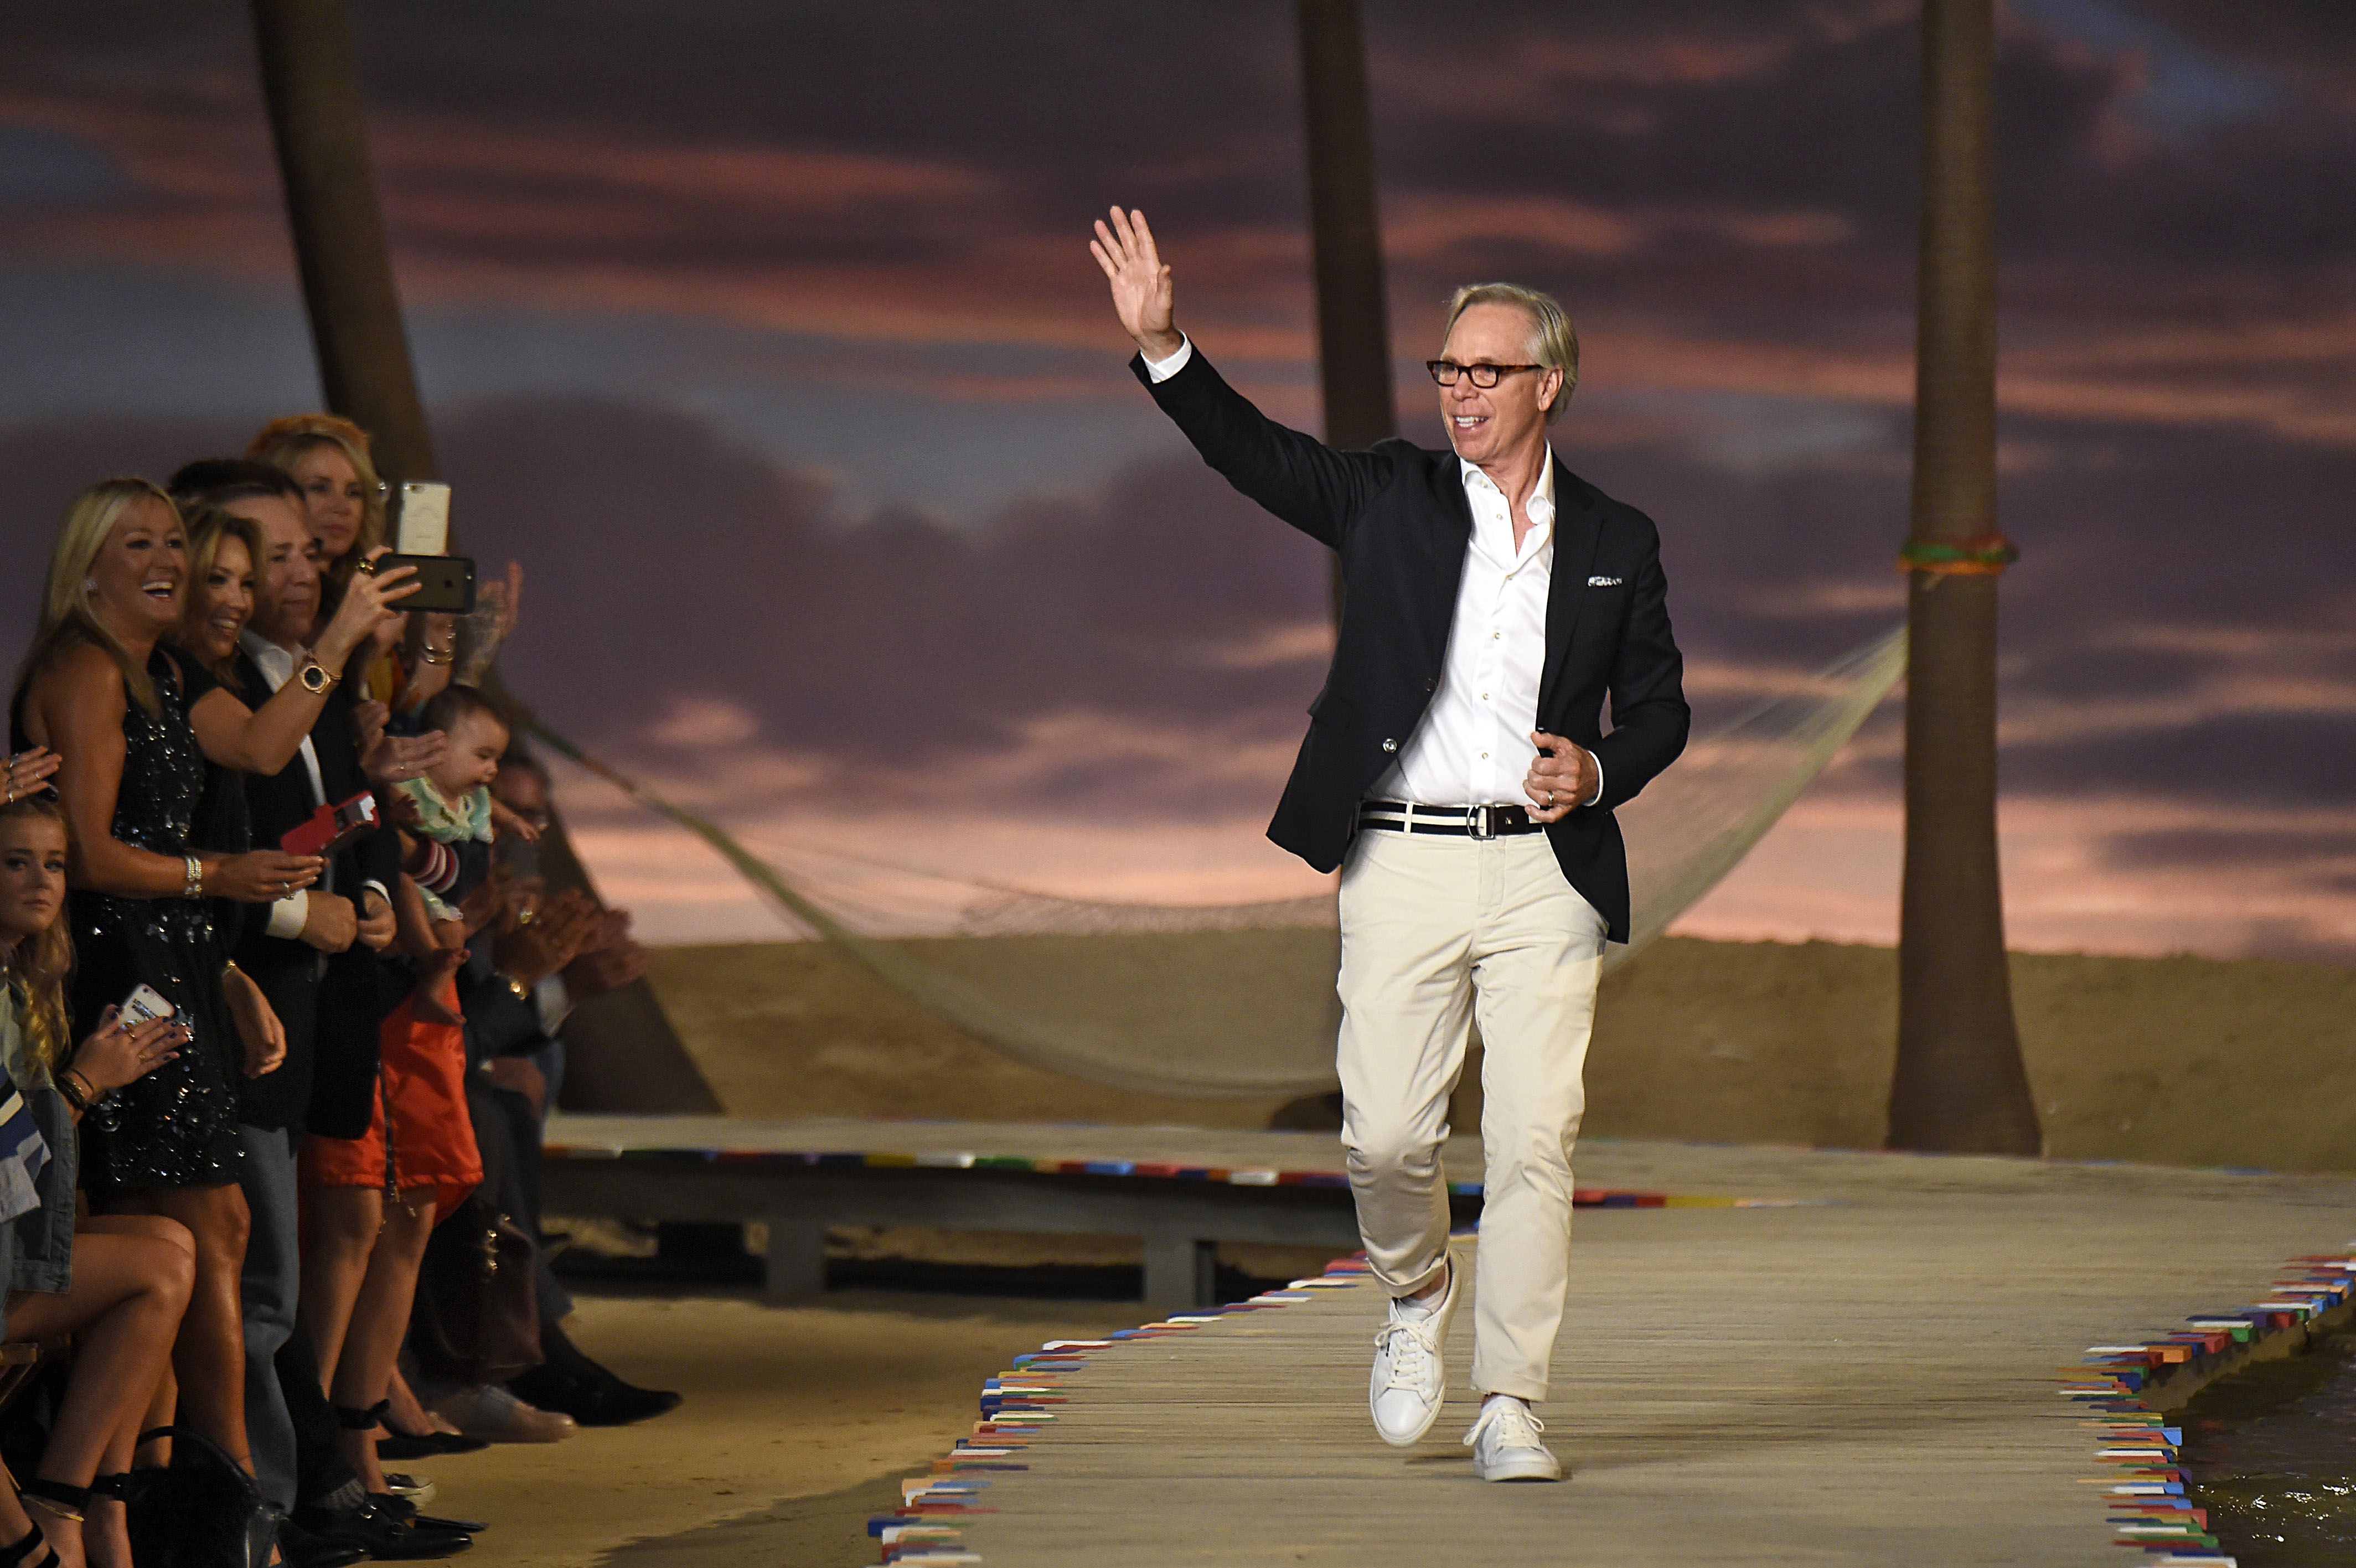 tang Bloom tilbede Tommy Hilfiger to be honoured at this year's Fashion Awards